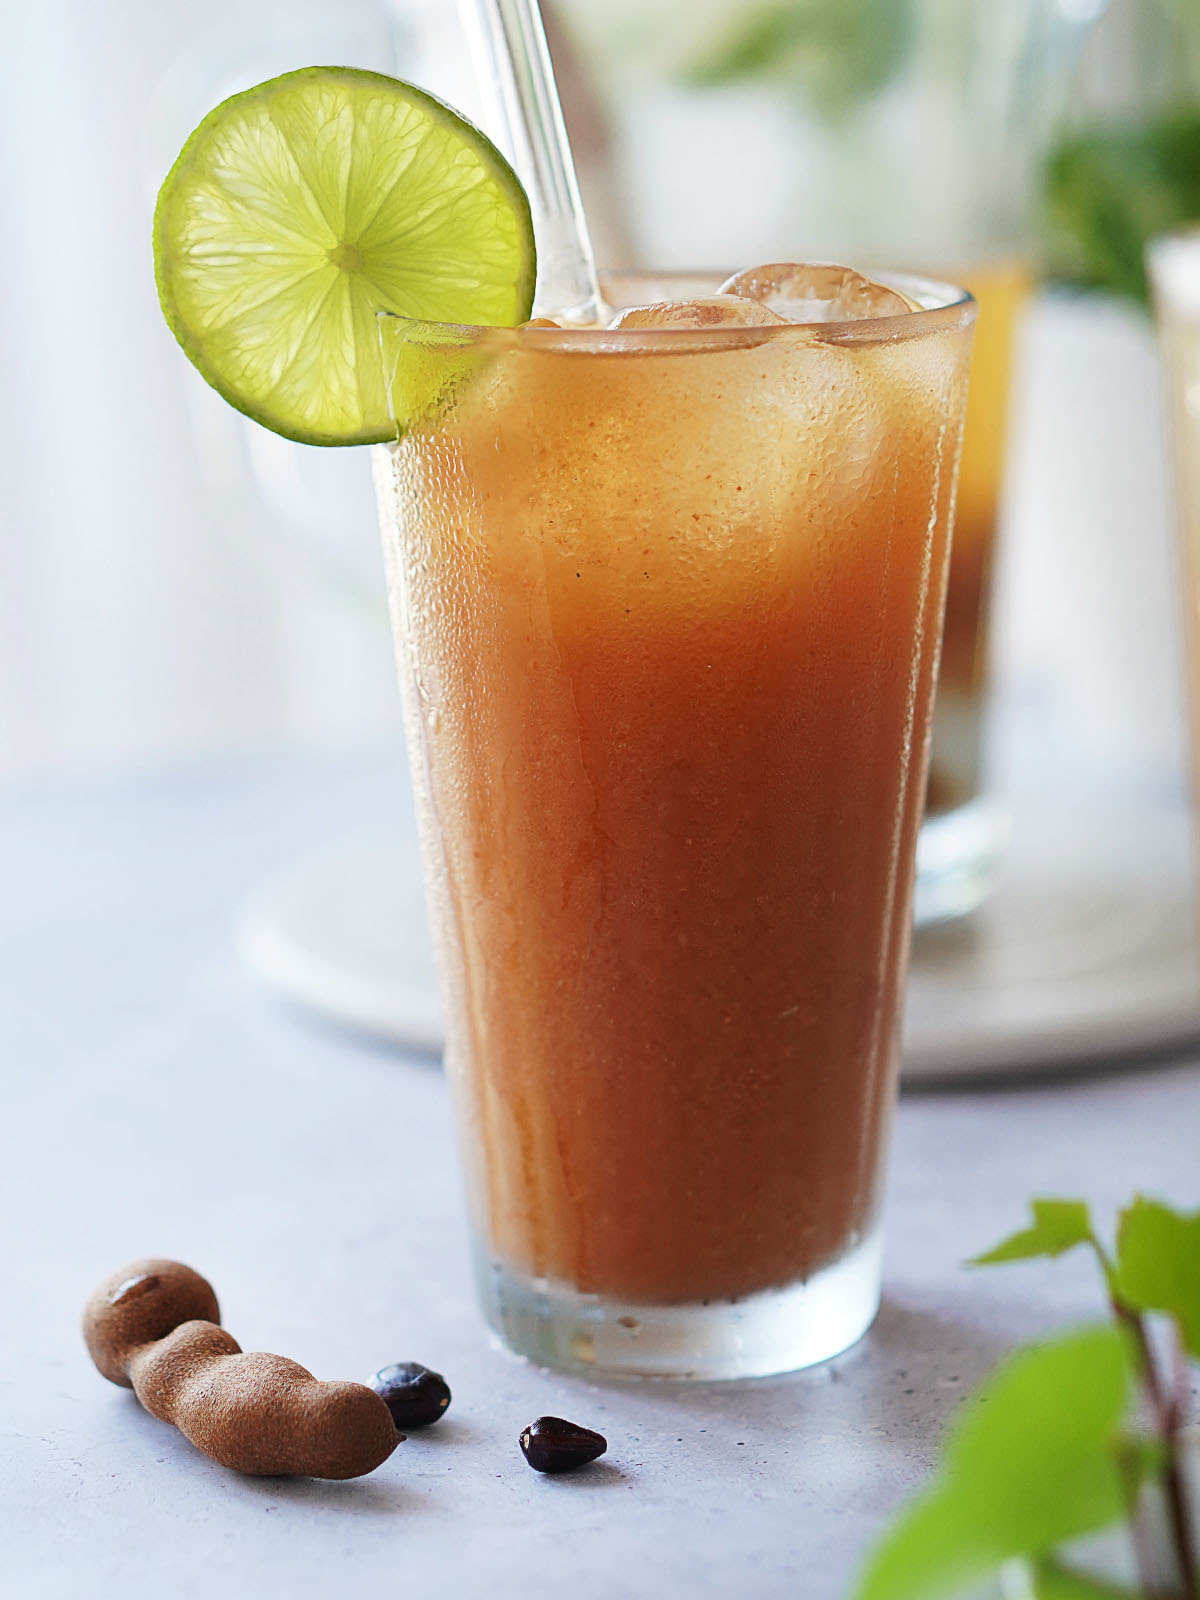 A glass with tamarind water garnished with a lime slice.